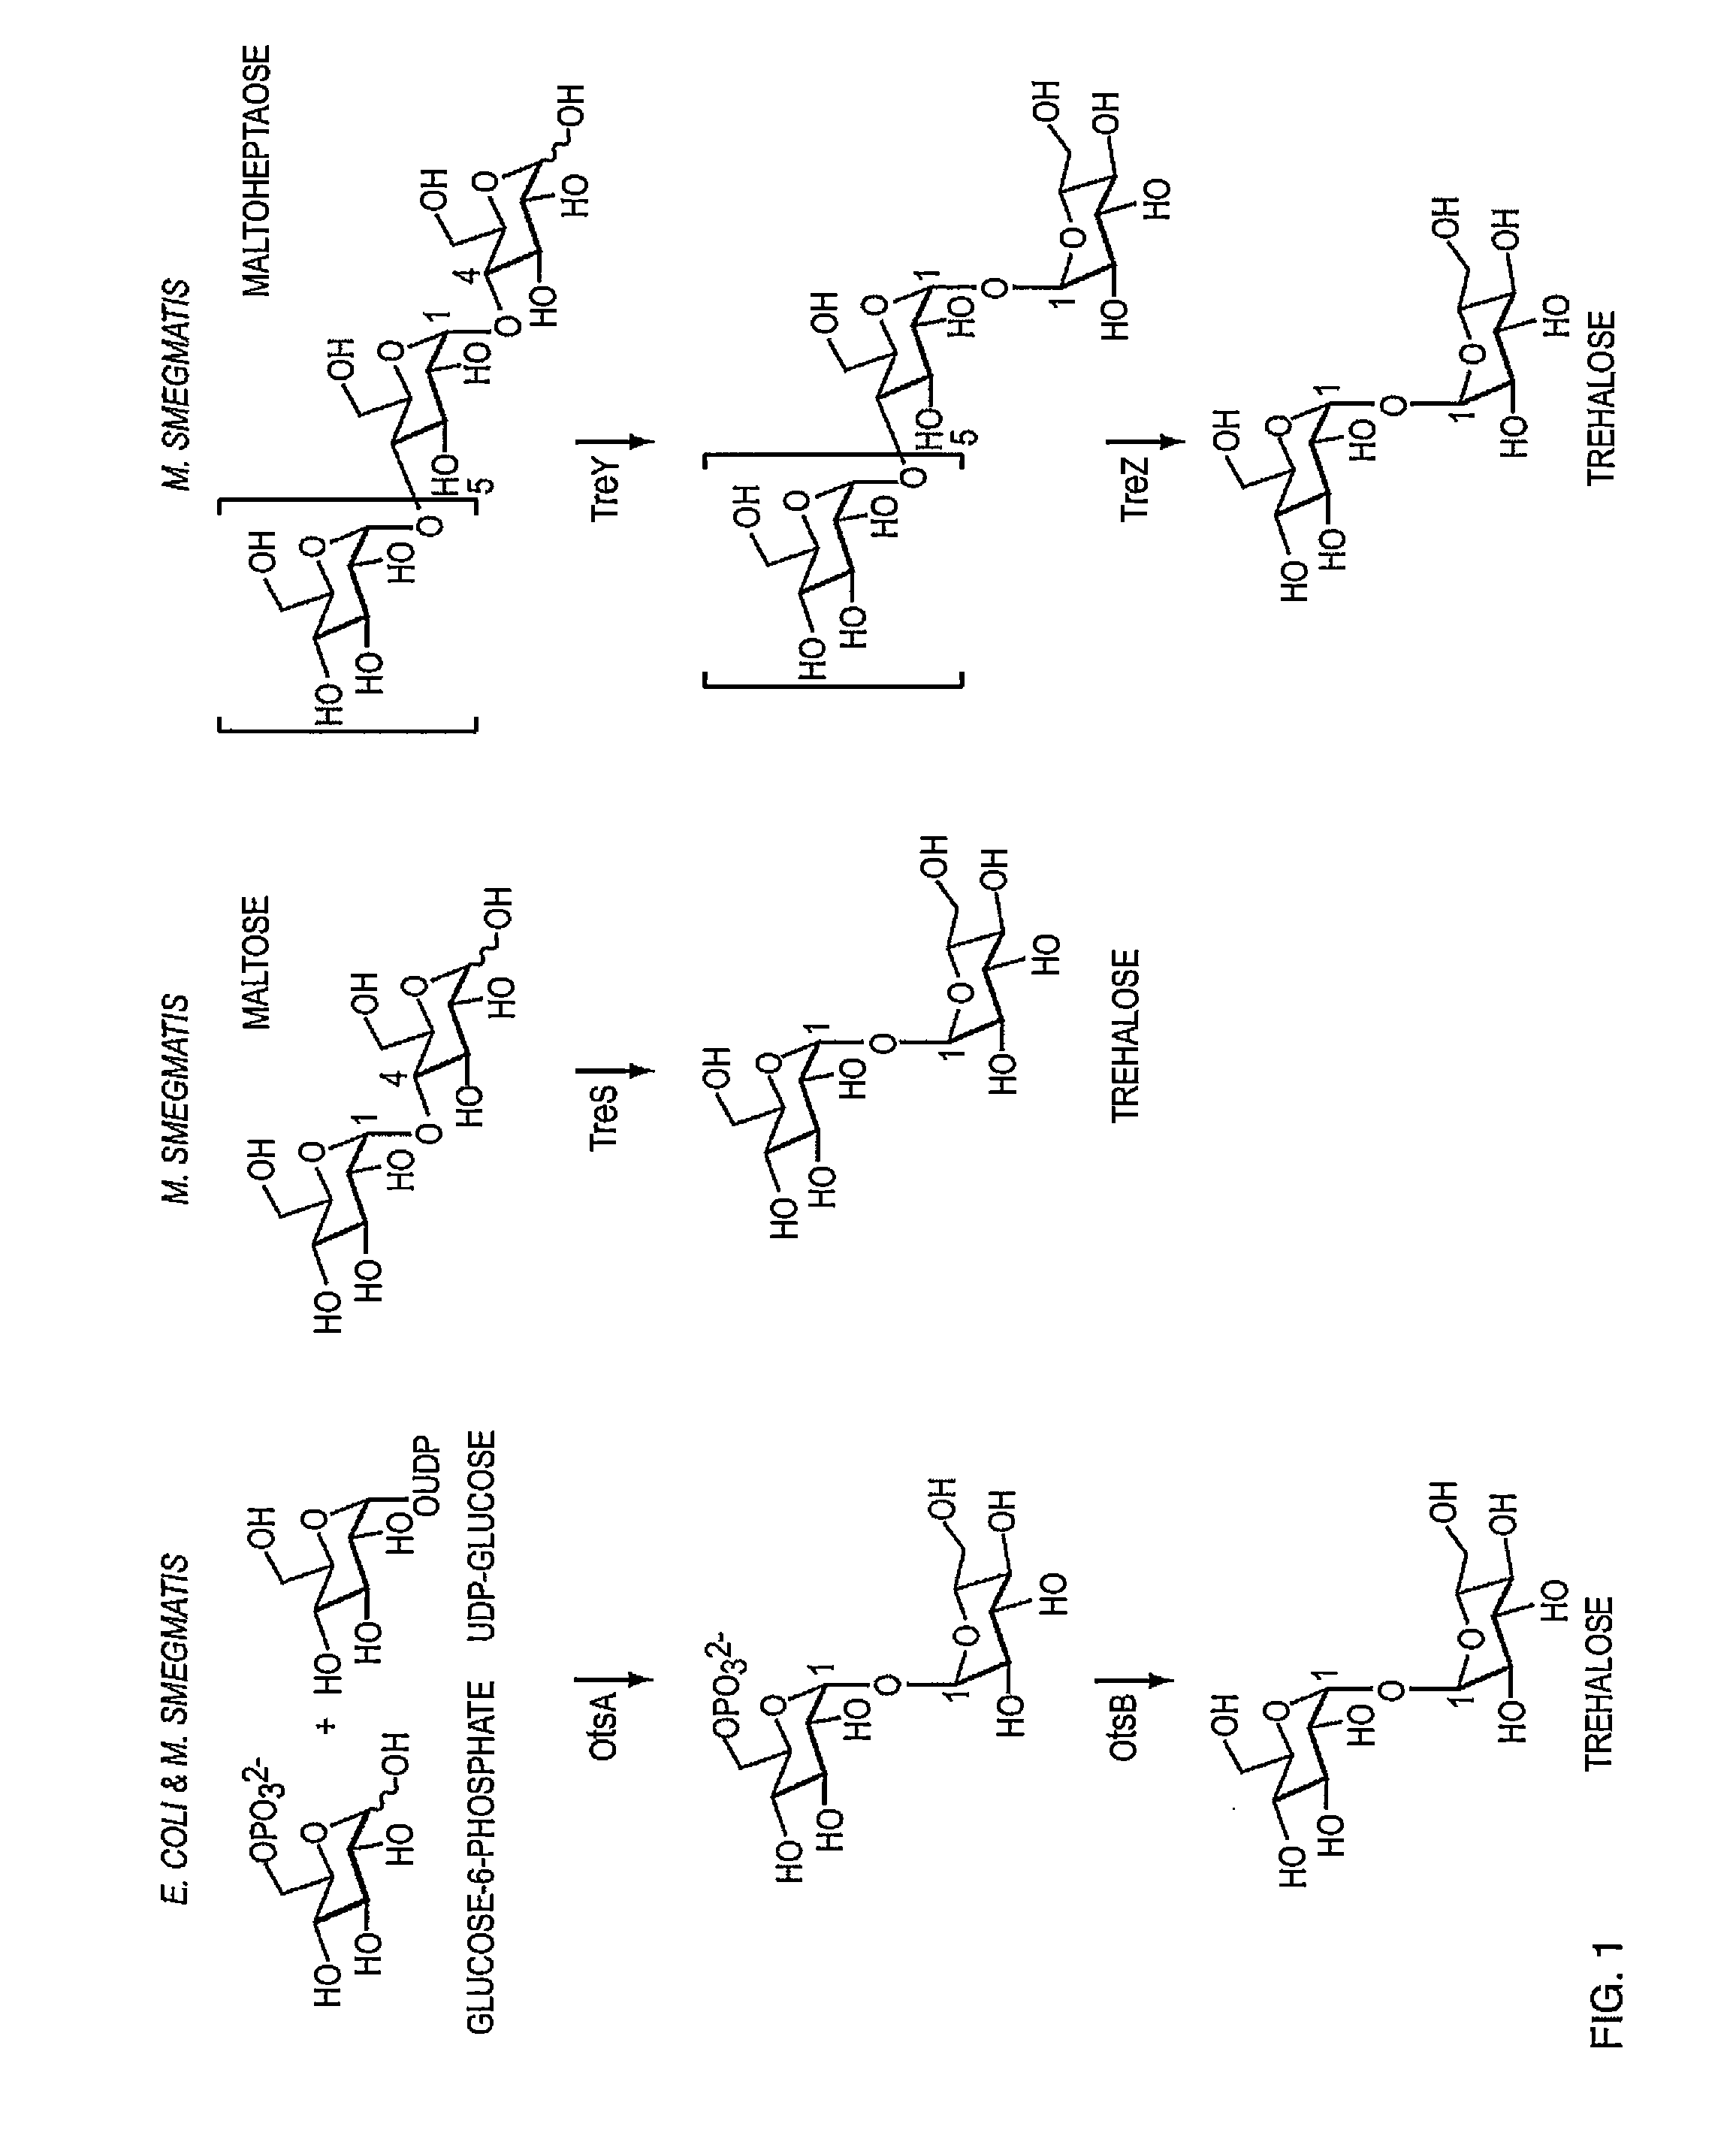 Bacteria with increased trehalose production and method for using the same in bioremediation